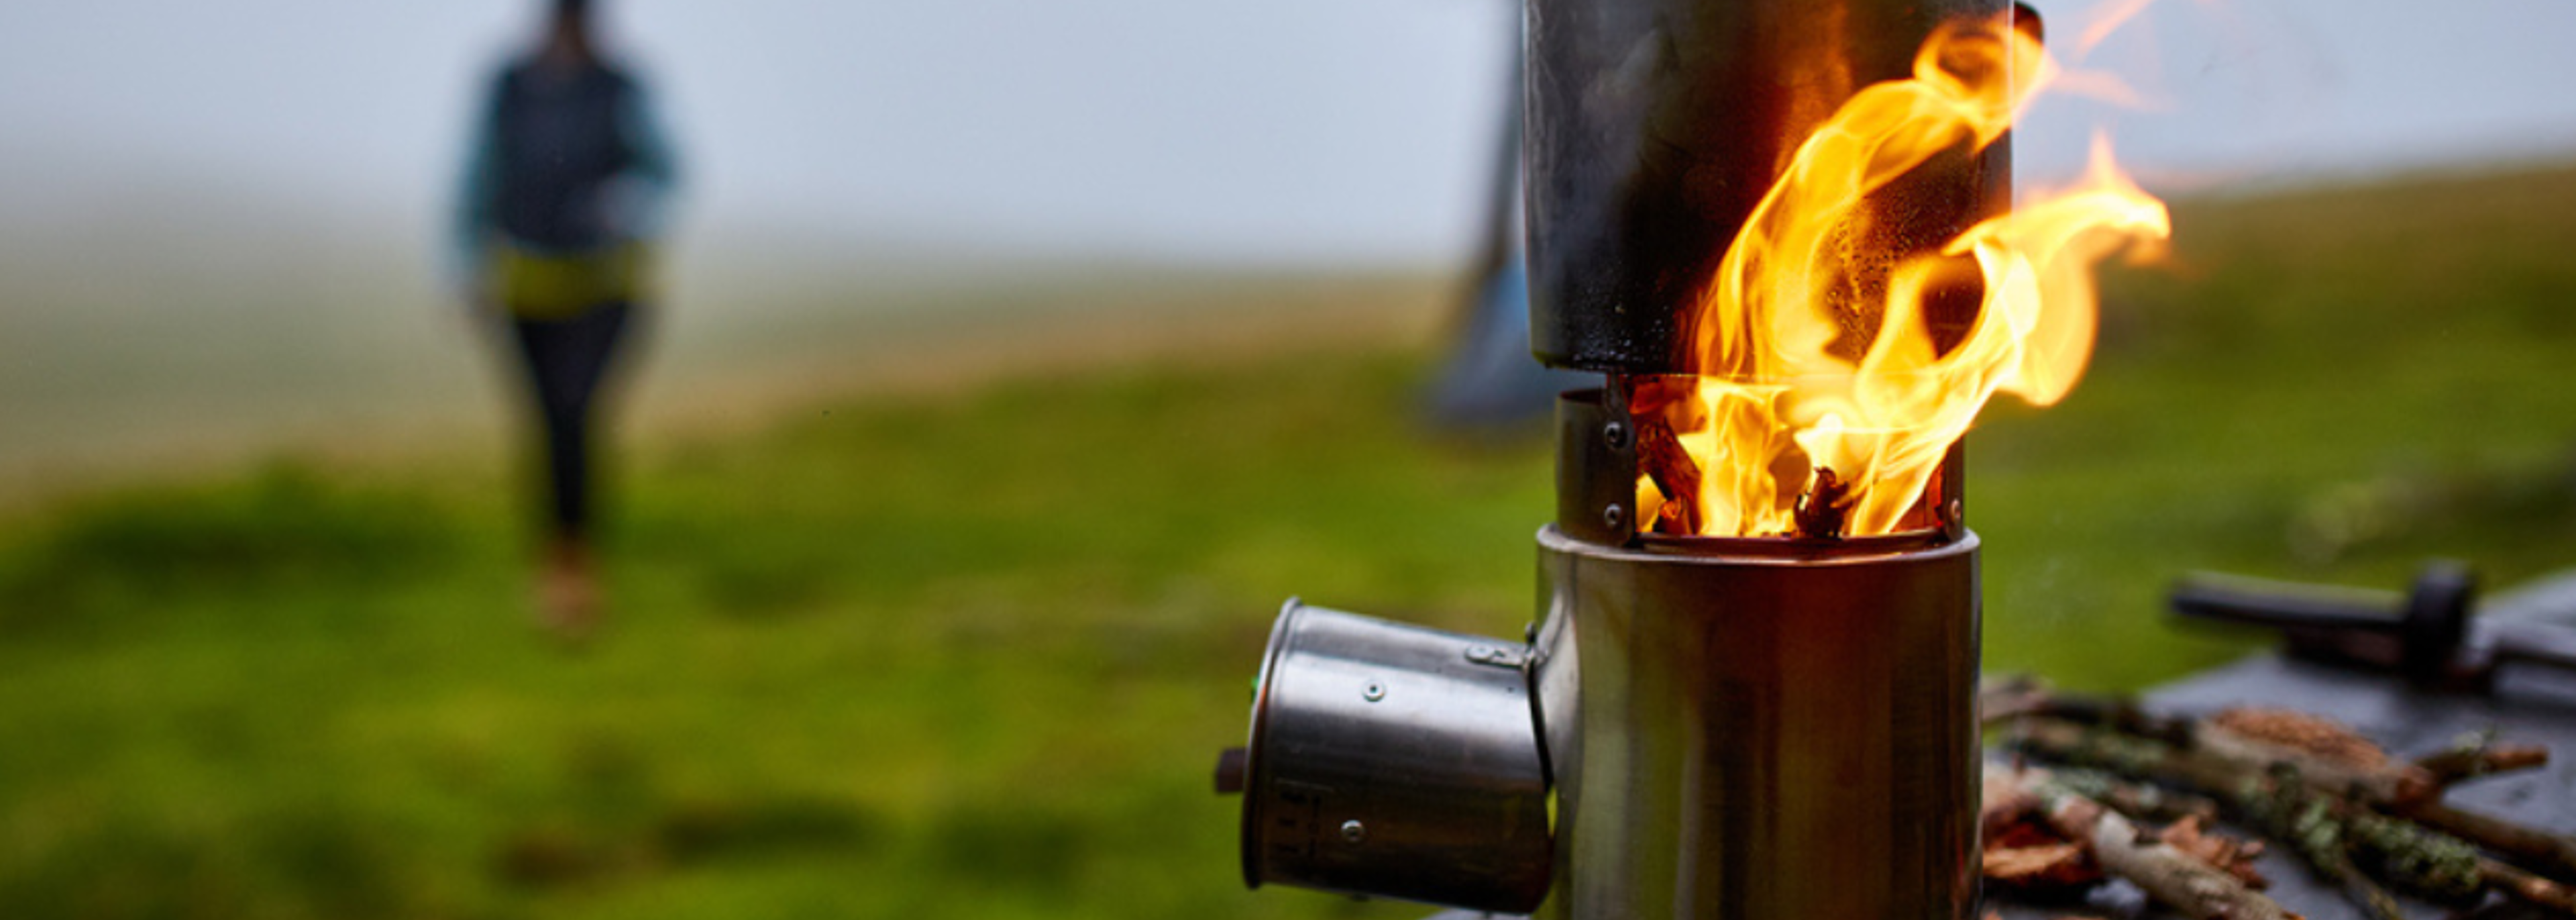 Health is being damaged by rise in wood burners